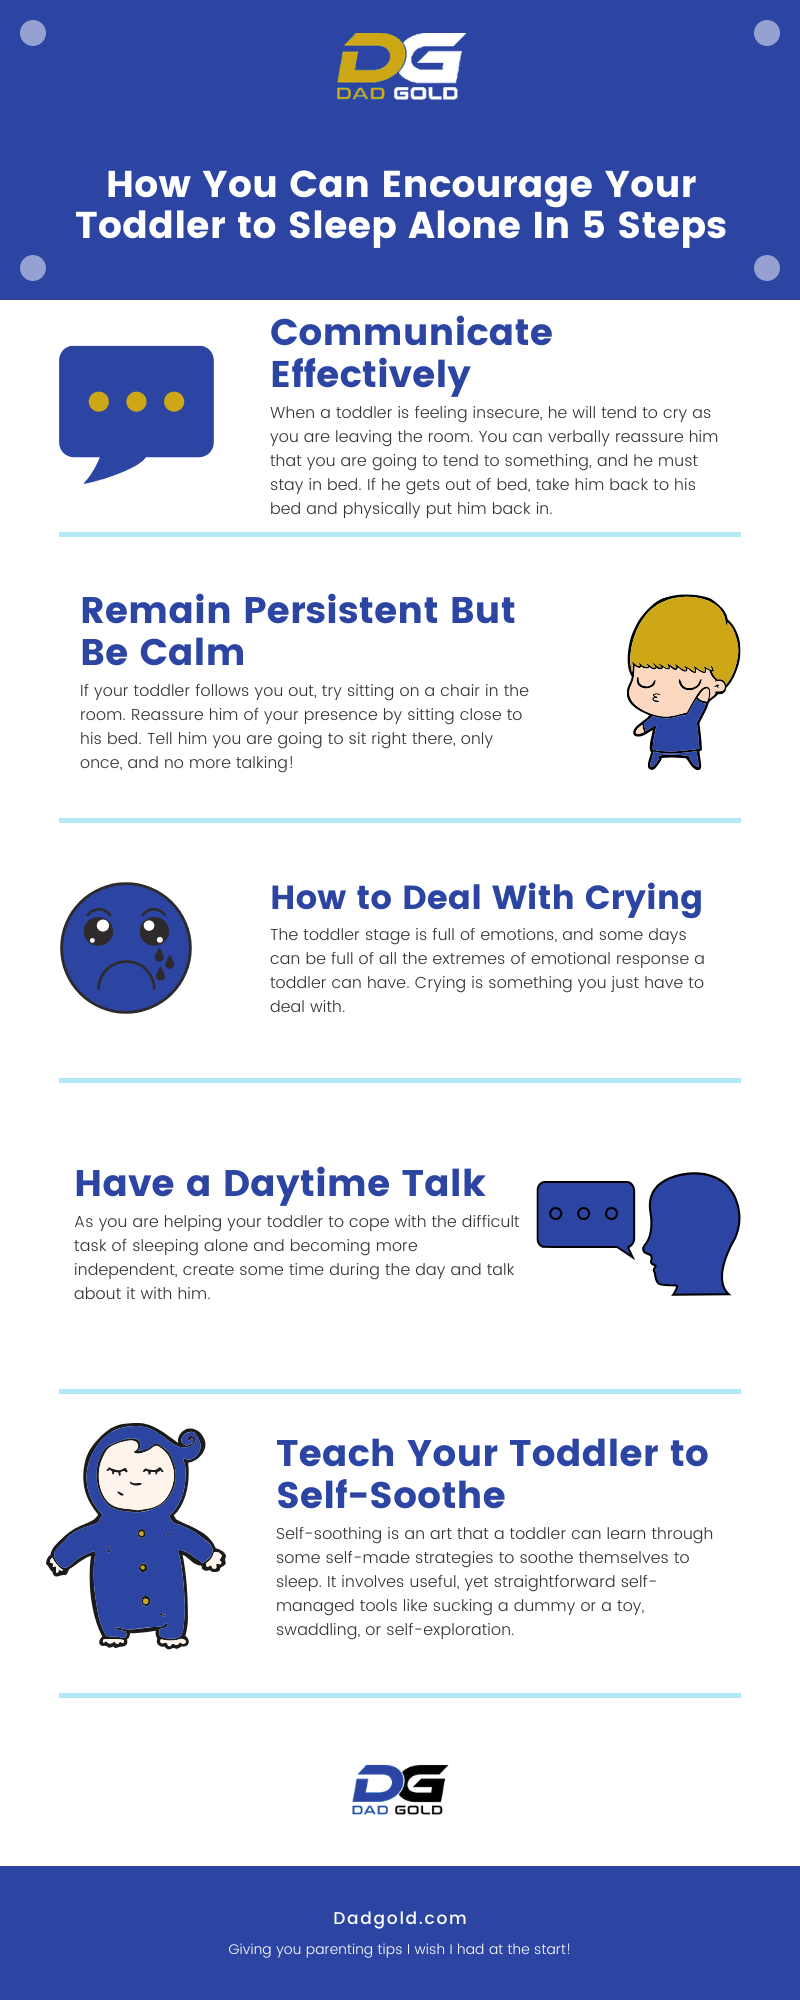 How Can You Encourage Your Toddler to Sleep Alone Infographic